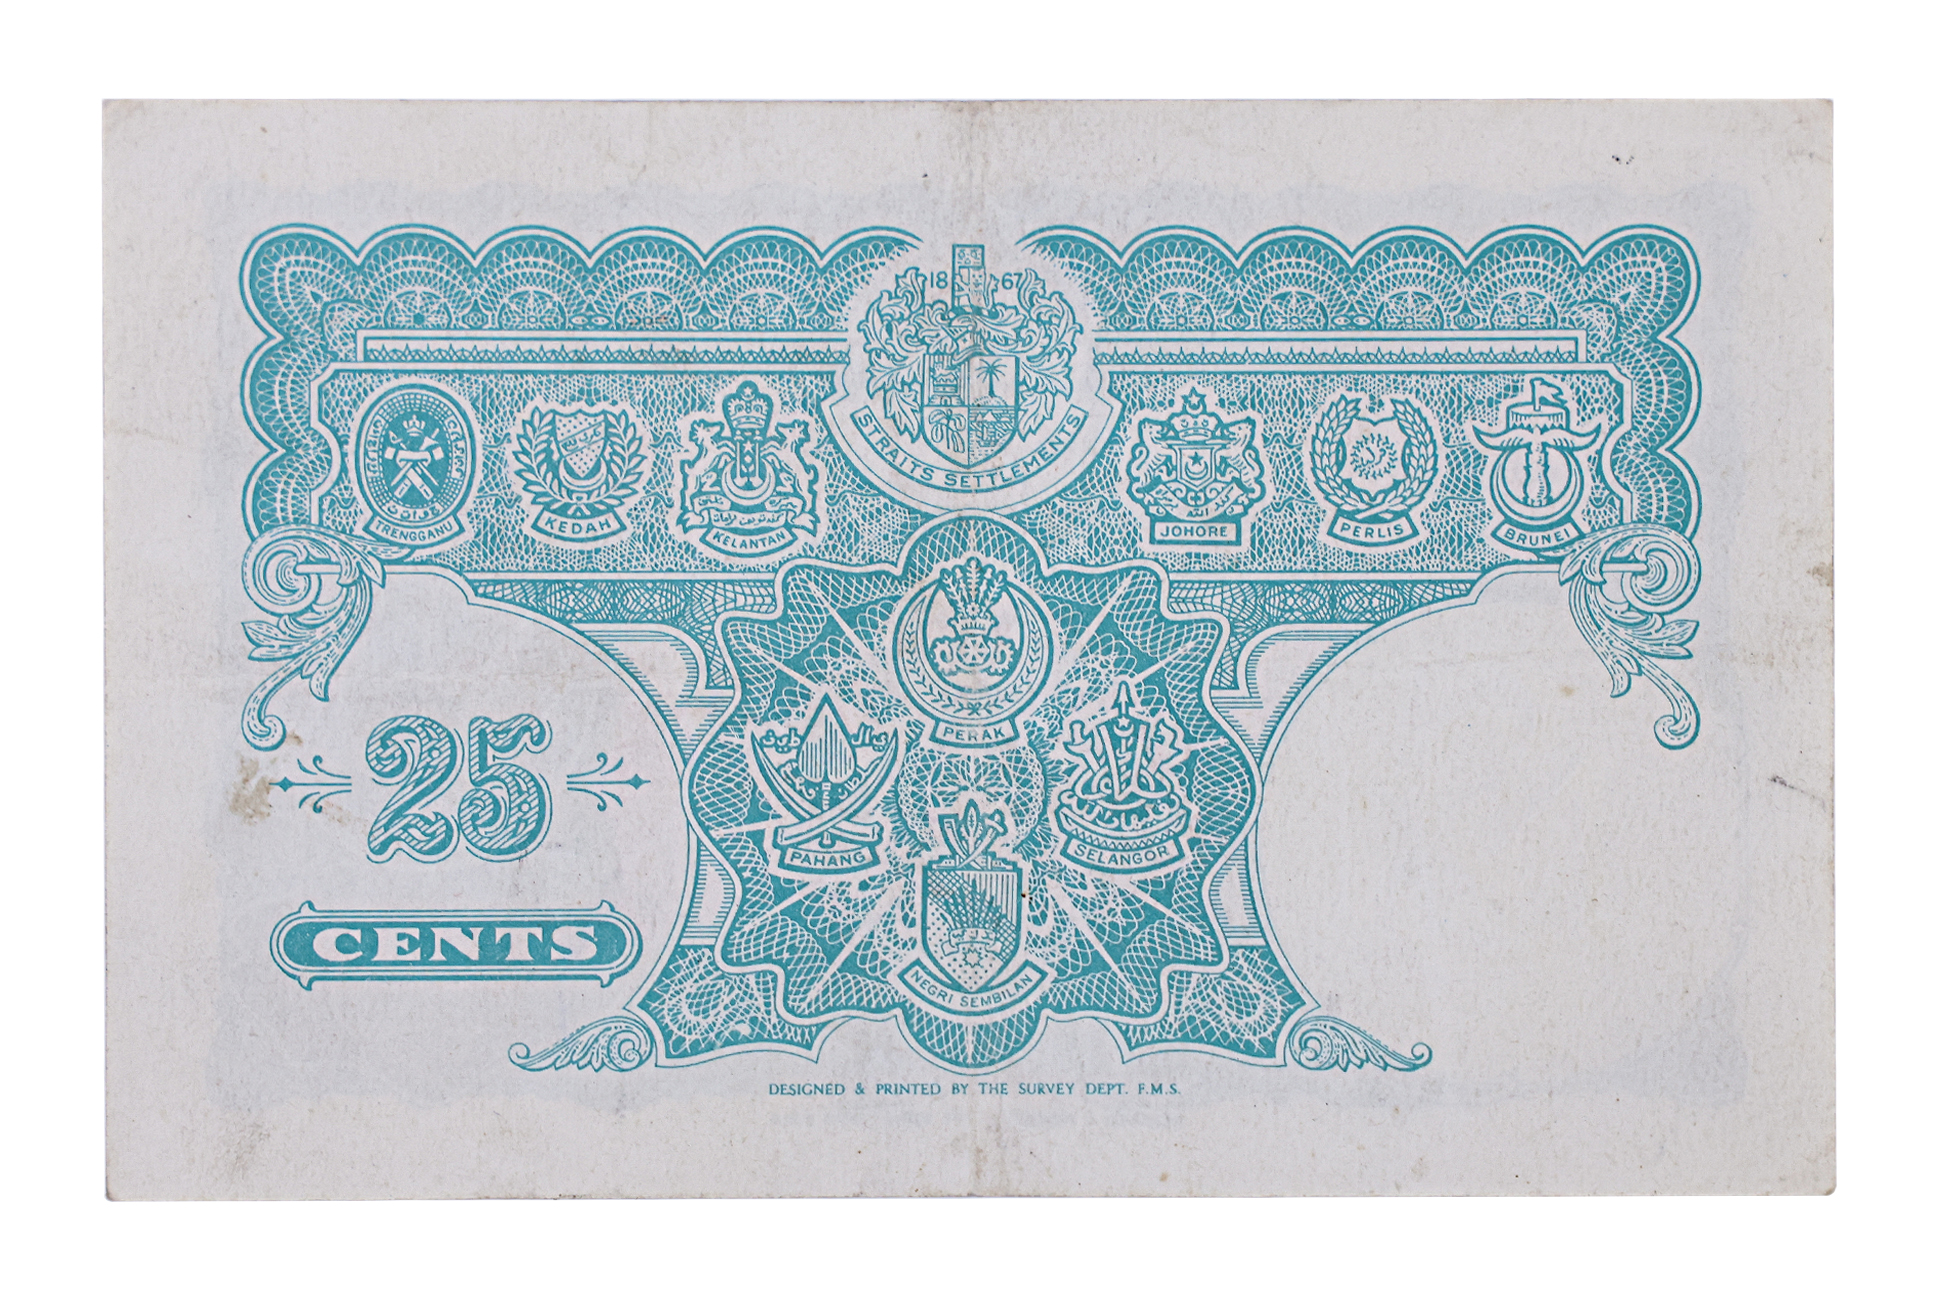 MALAYA 25 CENTS 1940 - SERIAL LETTER E - Image 2 of 2